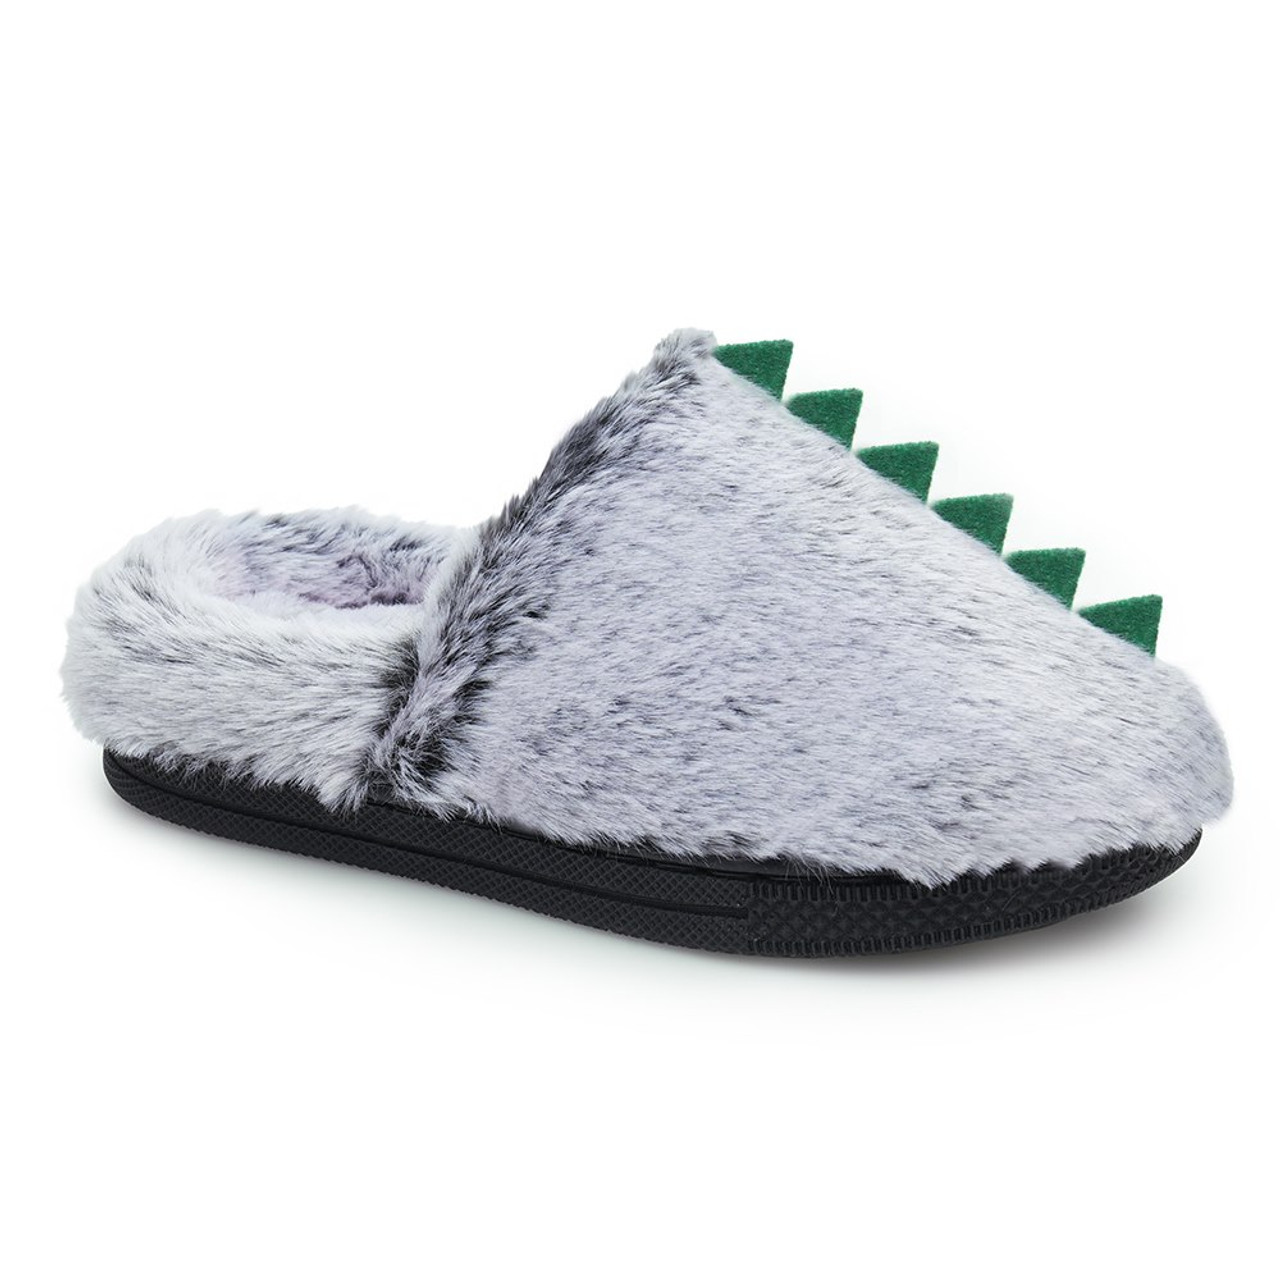 Top-selling Item] Godzilla Kong Monster Movies Gift For Fan Street Style  Crocband Crocs